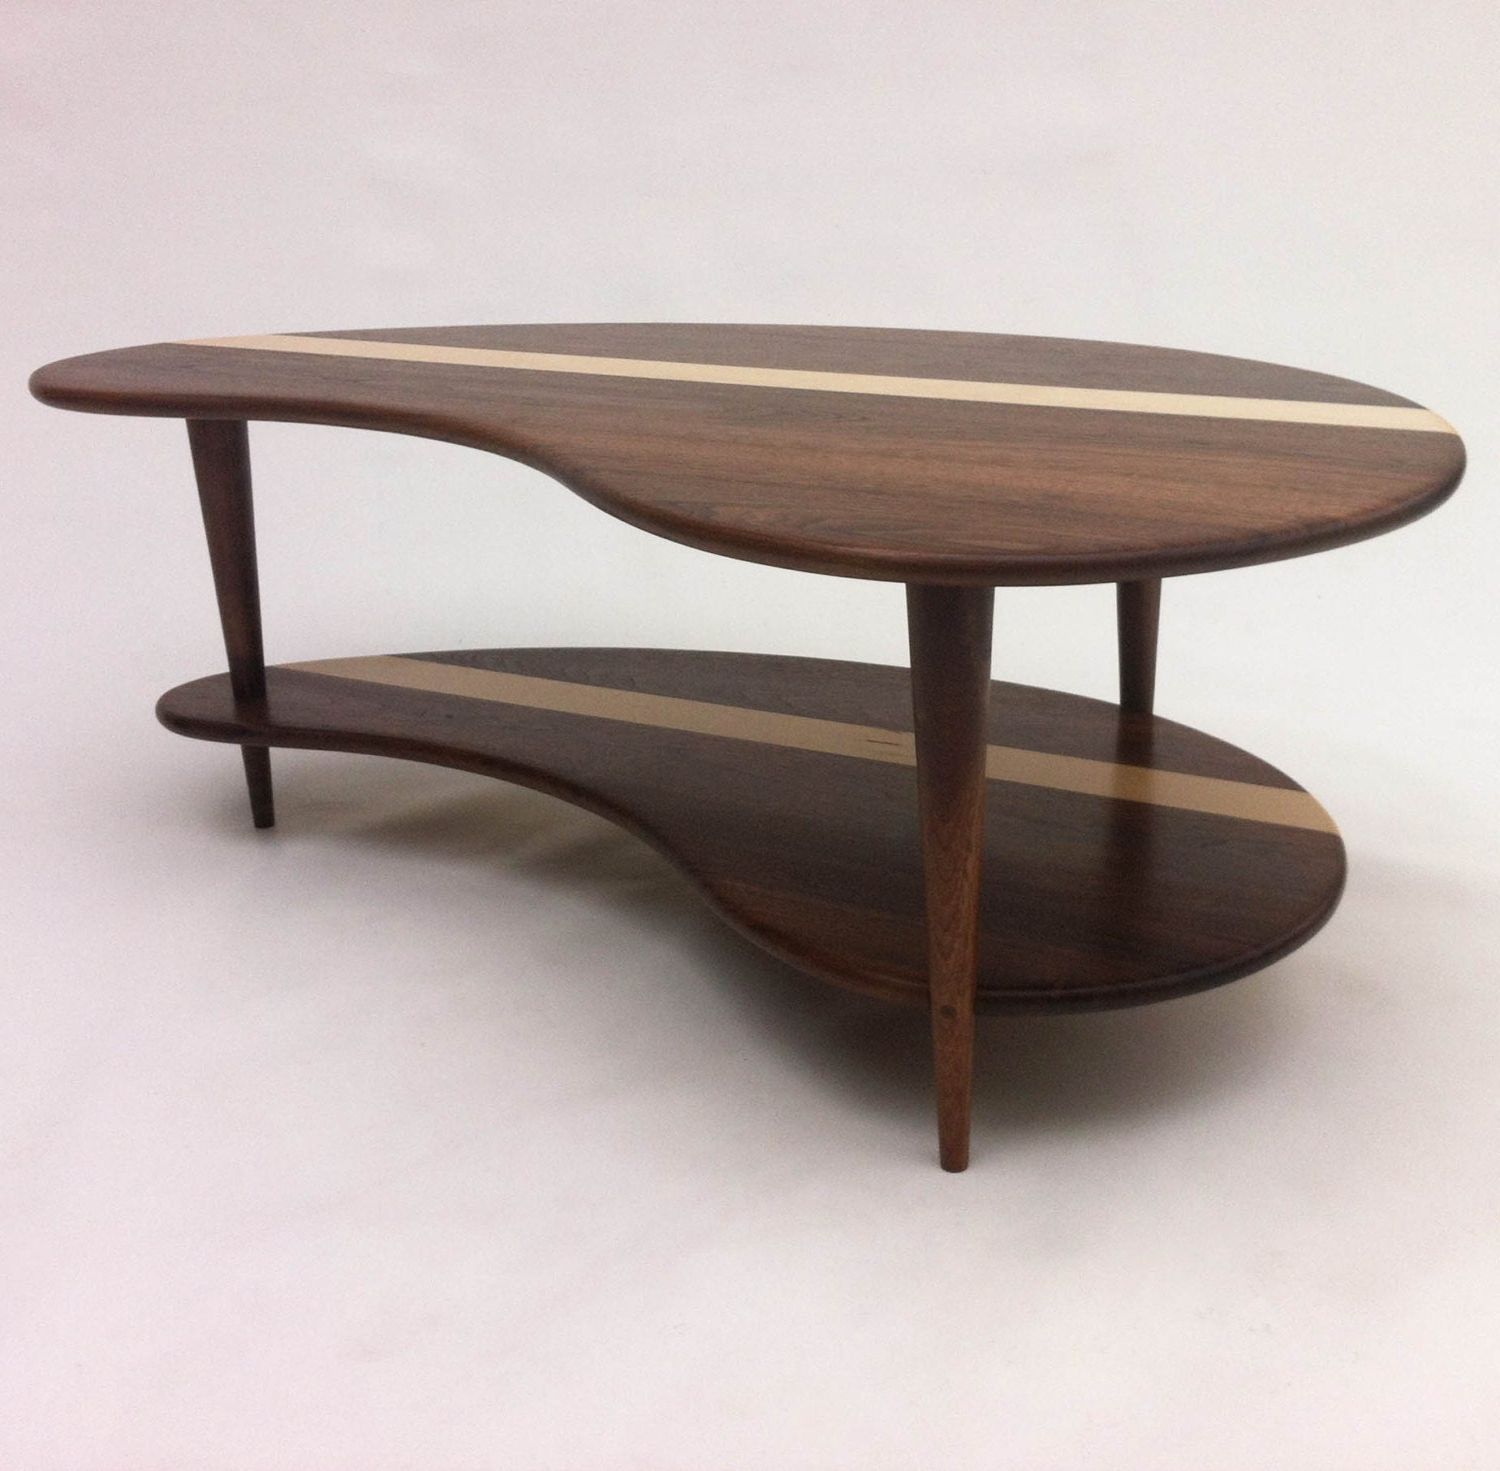 Most Popular Dark Walnut Drink Tables Throughout Mid Century Modern Coffee Cocktail Table Solid Walnut With (View 14 of 20)